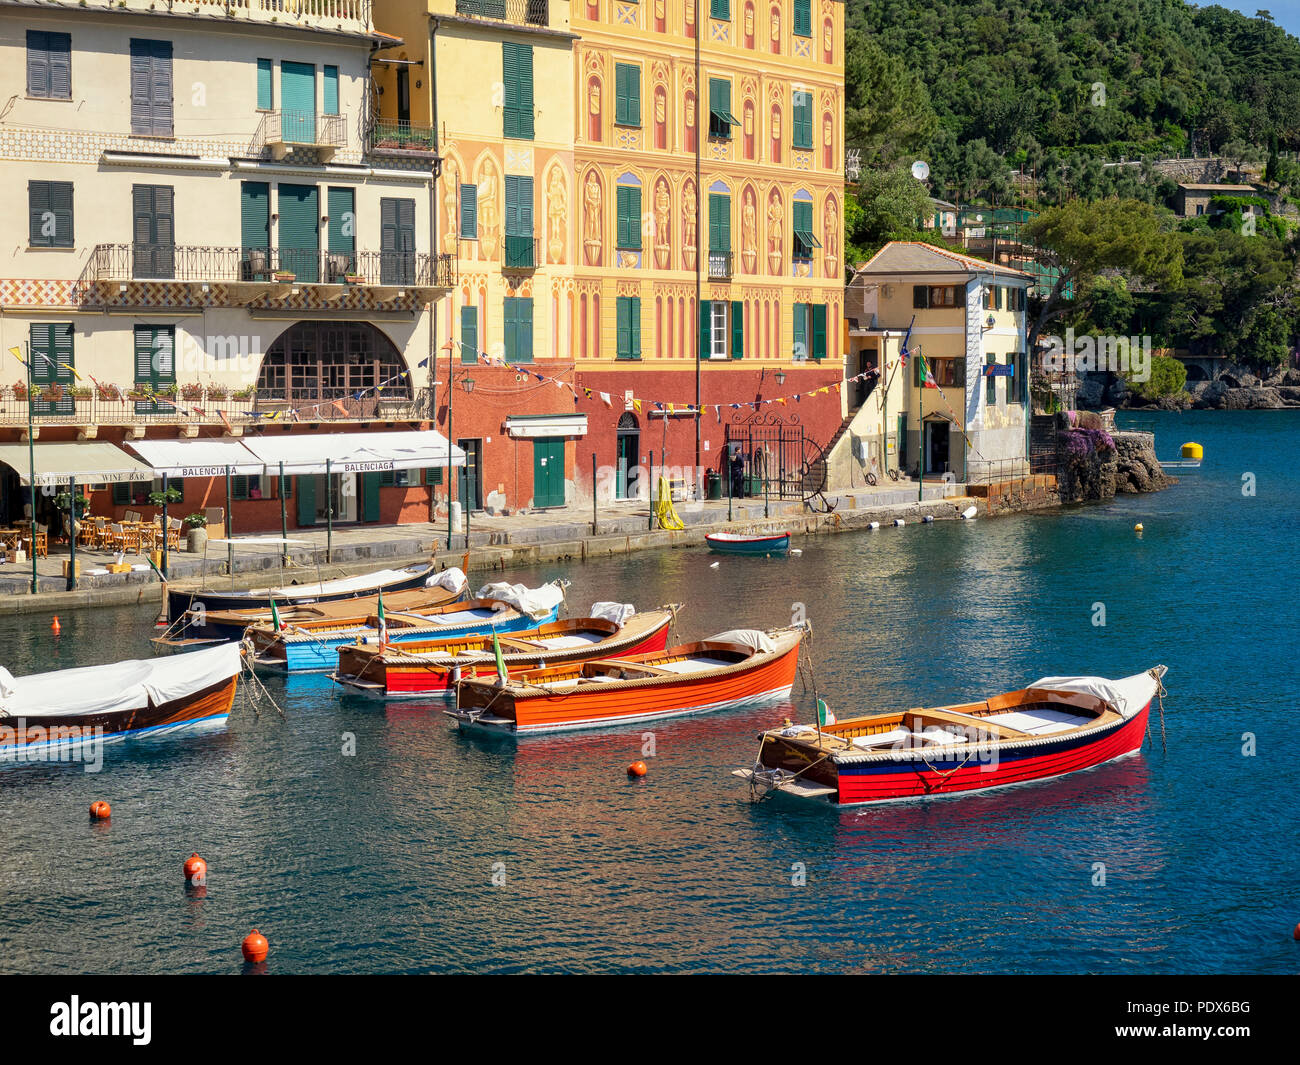 PORTOFINO, ITALY - MAY 19, 2018:   Small traditional boats in the harbour Stock Photo